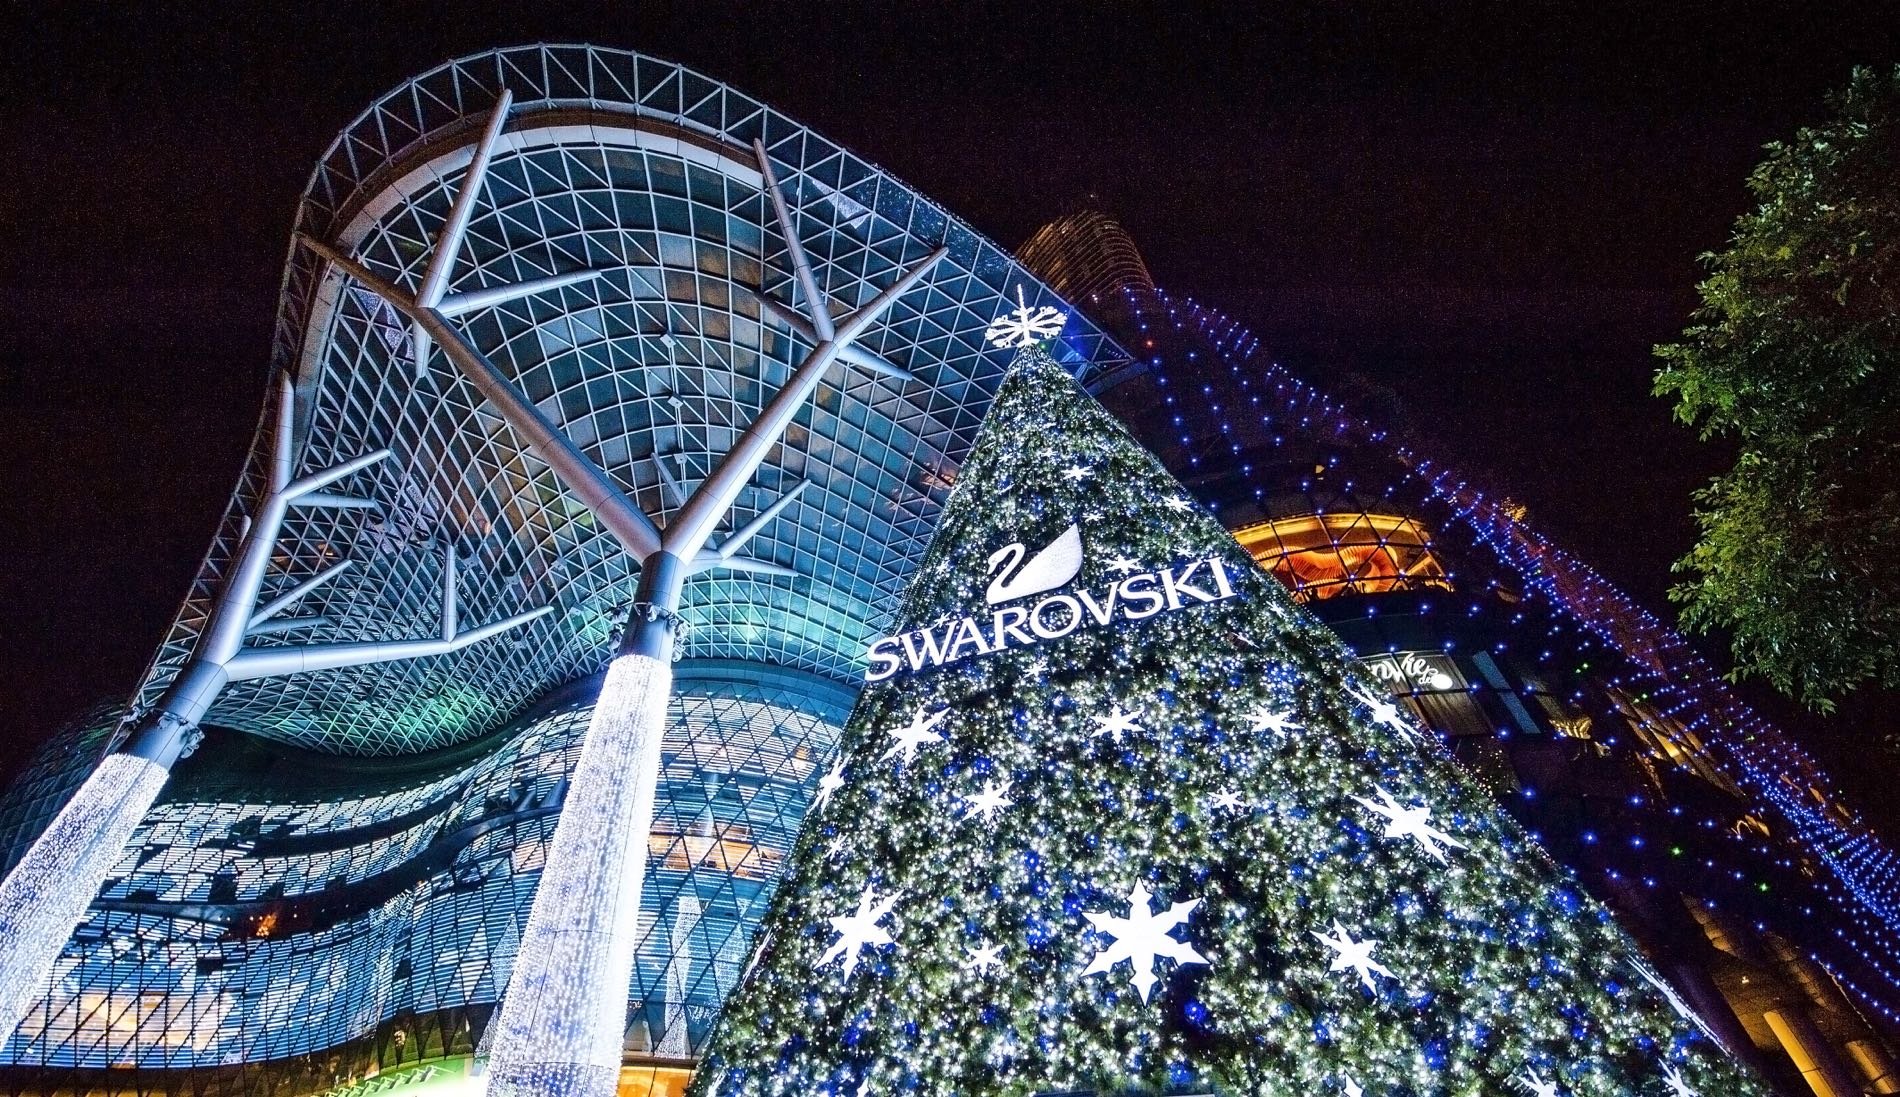 Gorgeous -Swarovski unveils its first outdoor Christmas Tree with 28,000 crystals - Luxurylaunches